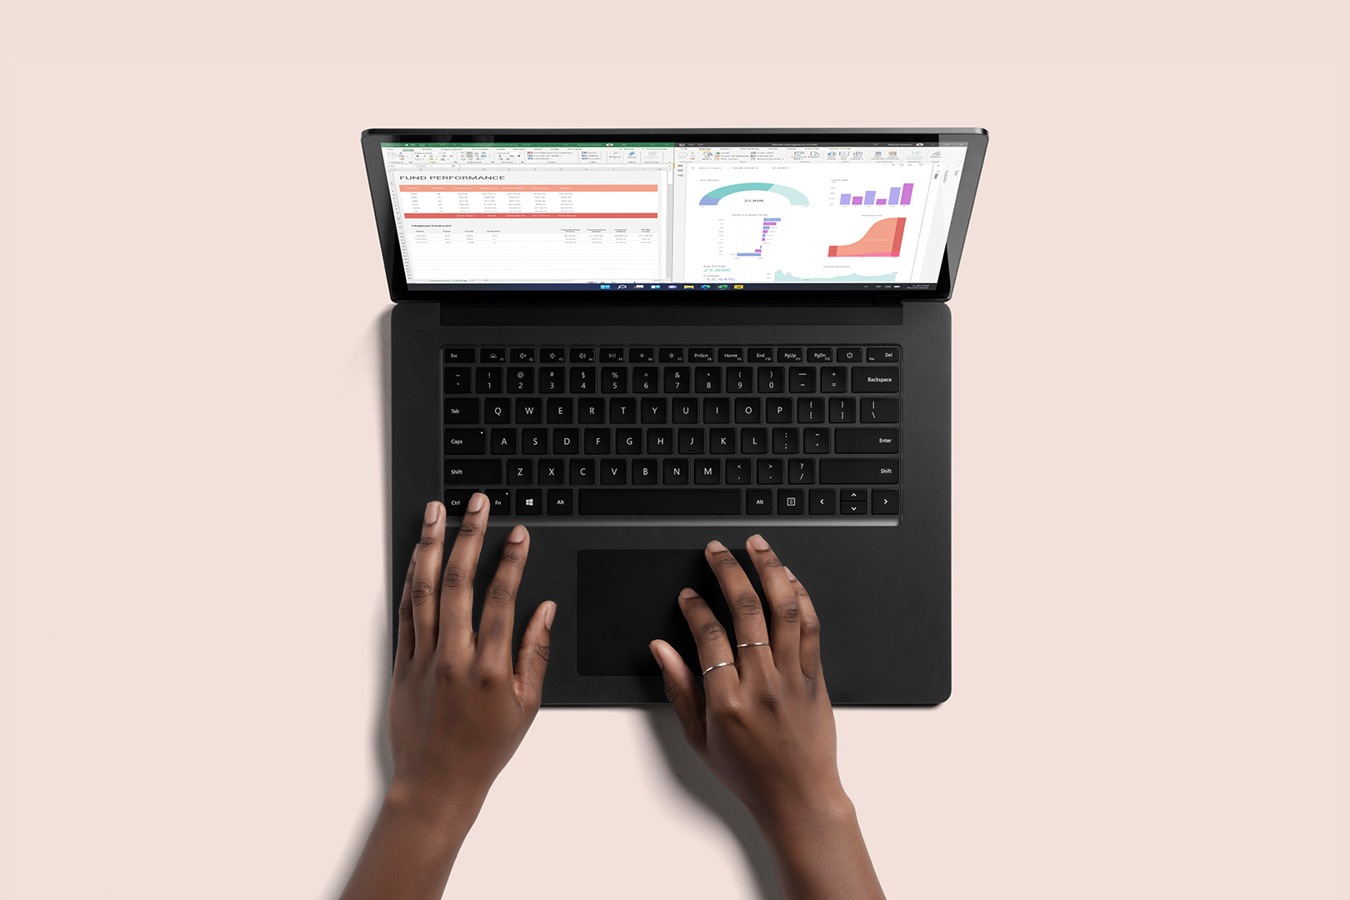 Top down view of Surface Laptop 4 in Black, with two hands typing on the keyboard